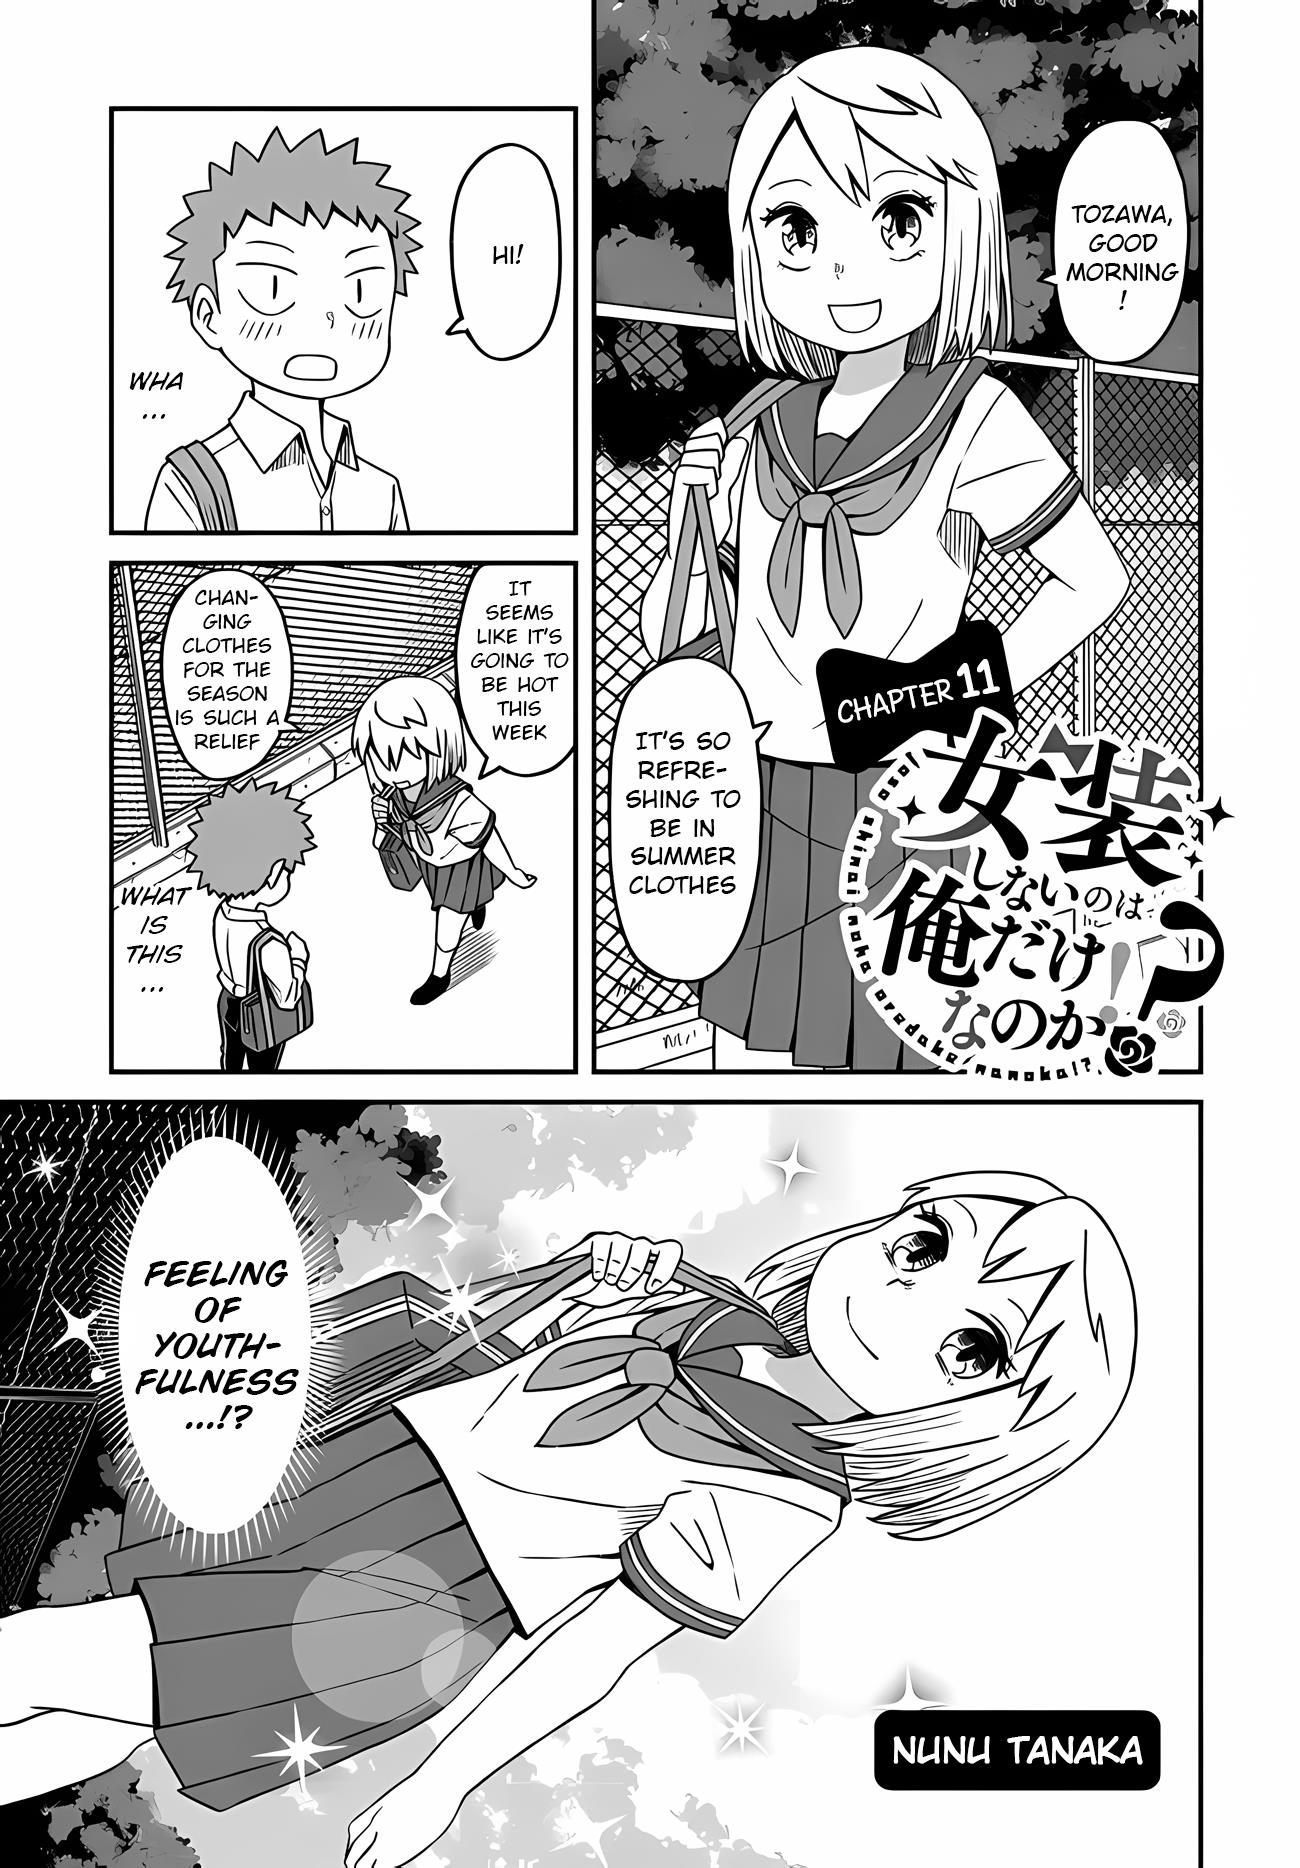 I'm The Only One Not Crossdressing!? - Page 1